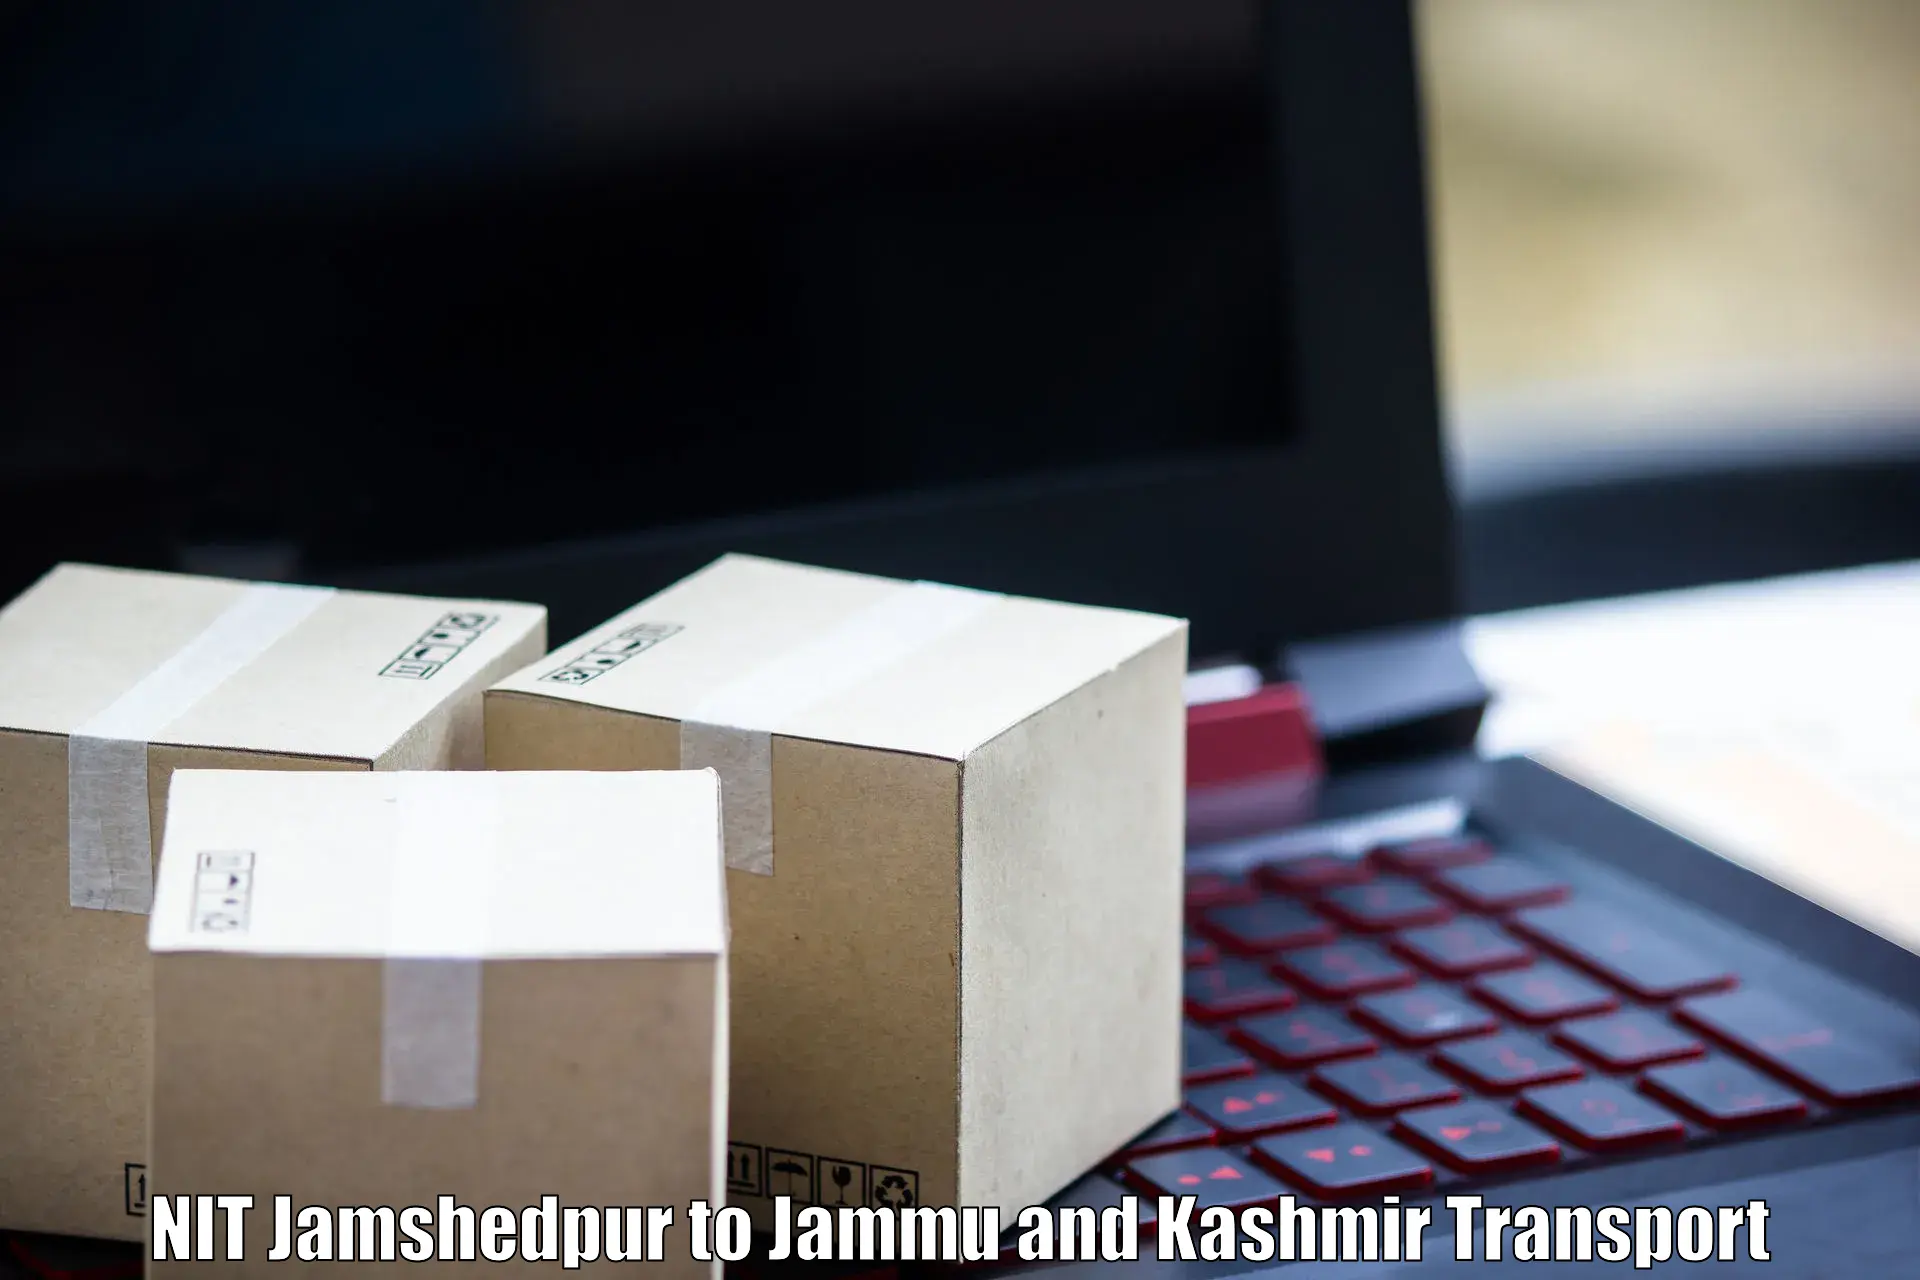 Truck transport companies in India in NIT Jamshedpur to Baramulla